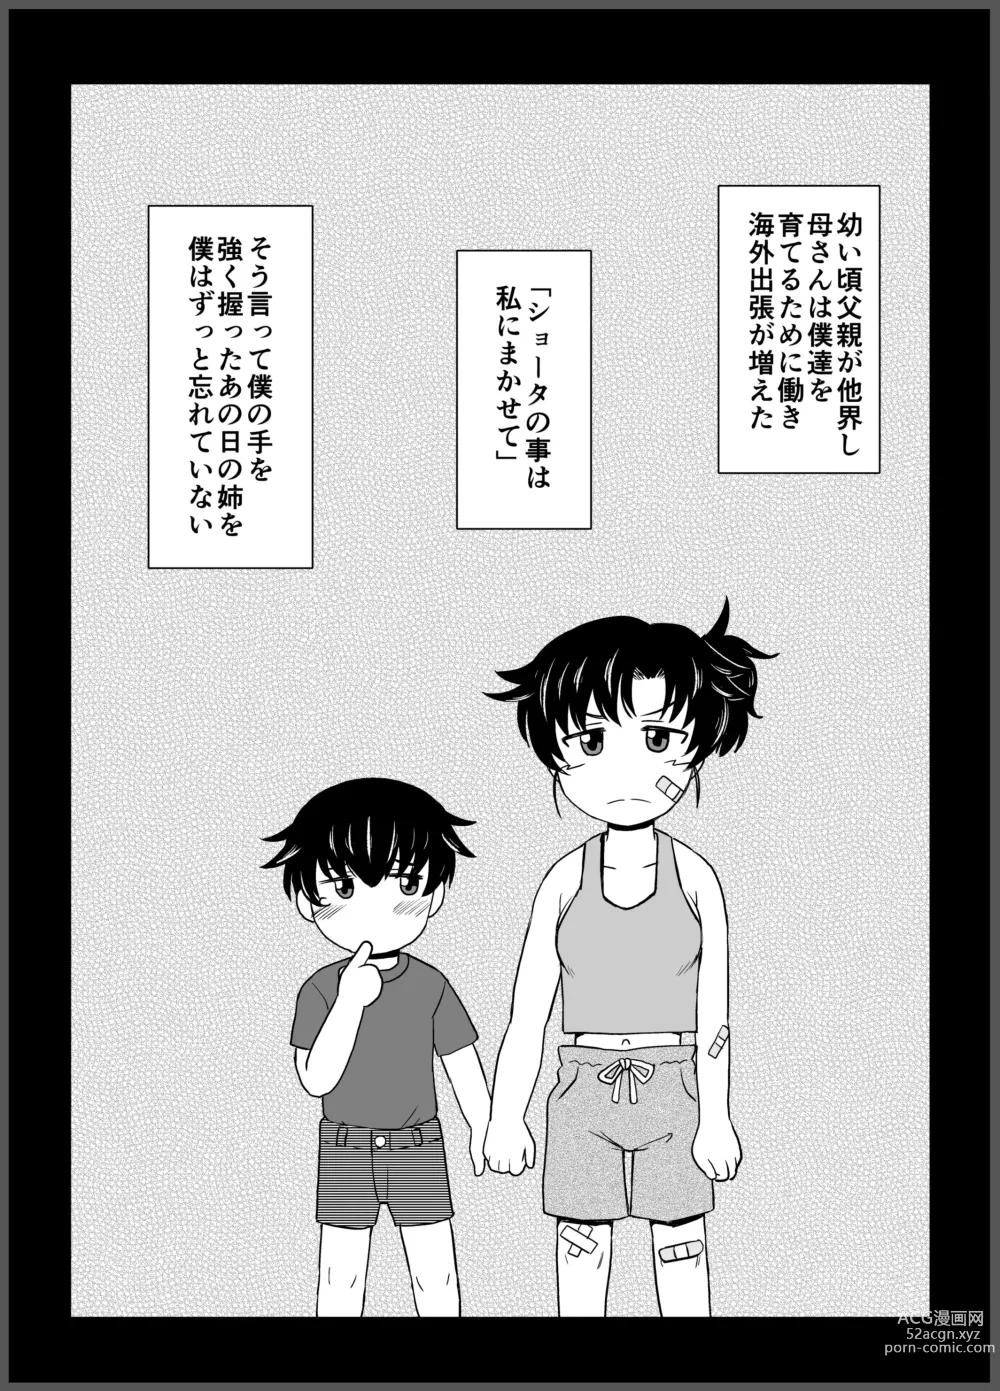 Page 6 of doujinshi Sister TR Anetorare-My favorite sister was stolen by him-DL increased version